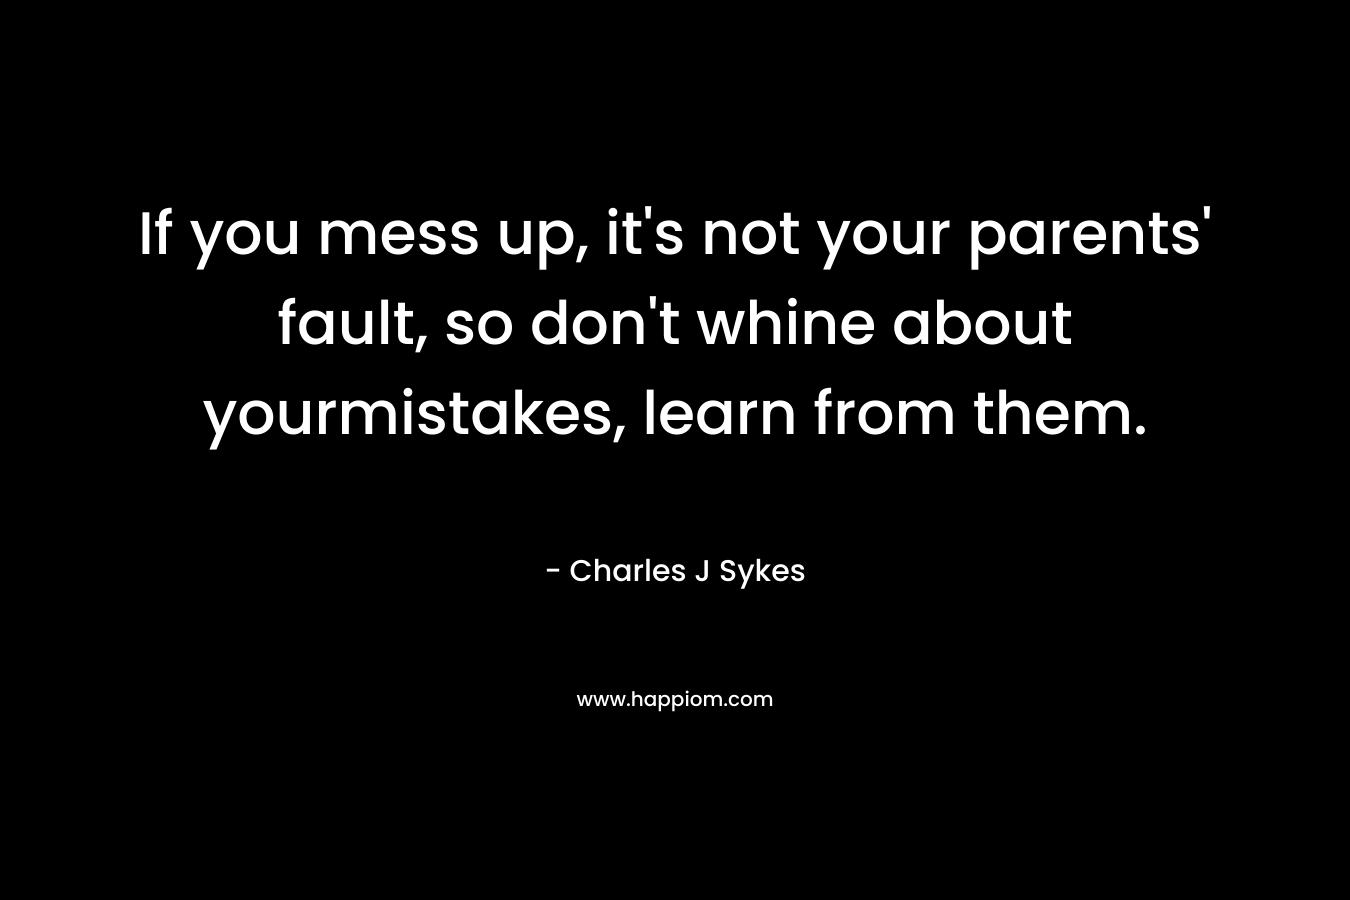 If you mess up, it’s not your parents’ fault, so don’t whine about yourmistakes, learn from them. – Charles J Sykes